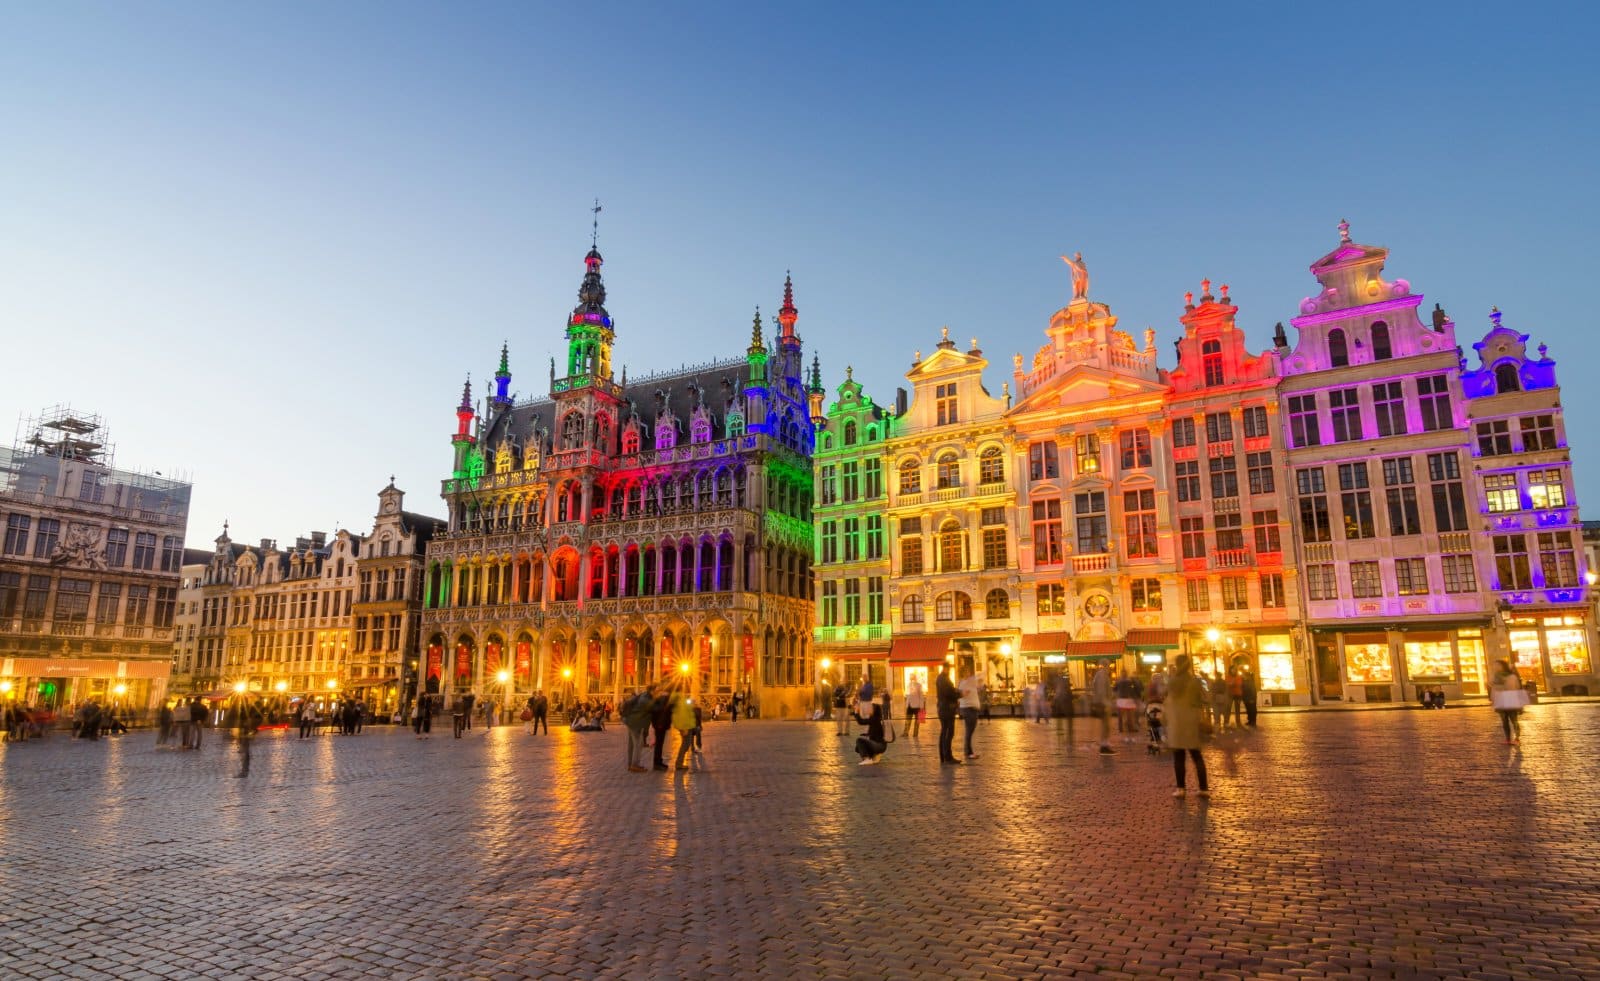 <p class="wp-caption-text">Image Credit: Shutterstock / Sira Anamwong</p>  <p><span>The Grand Place, or Grote Markt, is the historic heart of Brussels, surrounded by opulent guildhalls, the striking Town Hall, and the King’s House or Maison du Roi. This UNESCO World Heritage site highlights the city’s rich merchant past and architectural grandeur, with buildings dating back to the 17th century. The square is a visual feast and a vibrant public space that hosts flower markets, concerts, and the famous biennial Flower Carpet event.</span></p>